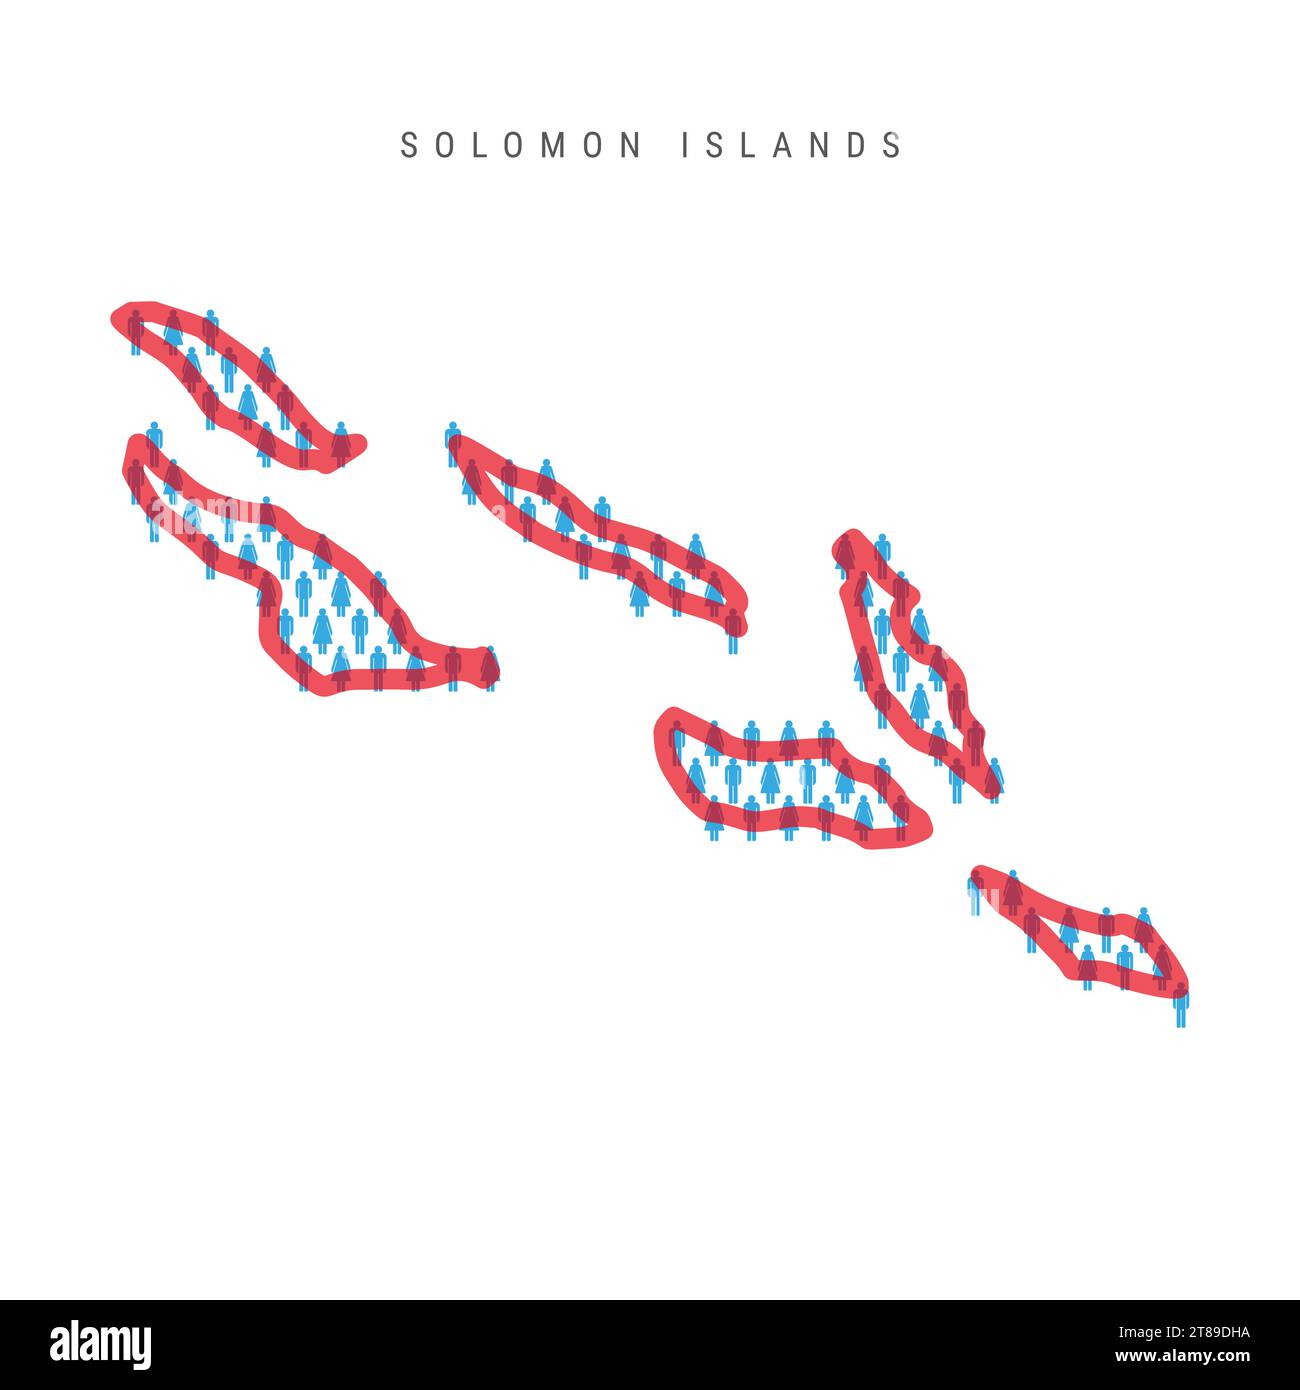 Solomon Islands population map. Stick figures Melanesia people map with bold red translucent country border. Pattern of men and women icons. Isolated Stock Vector